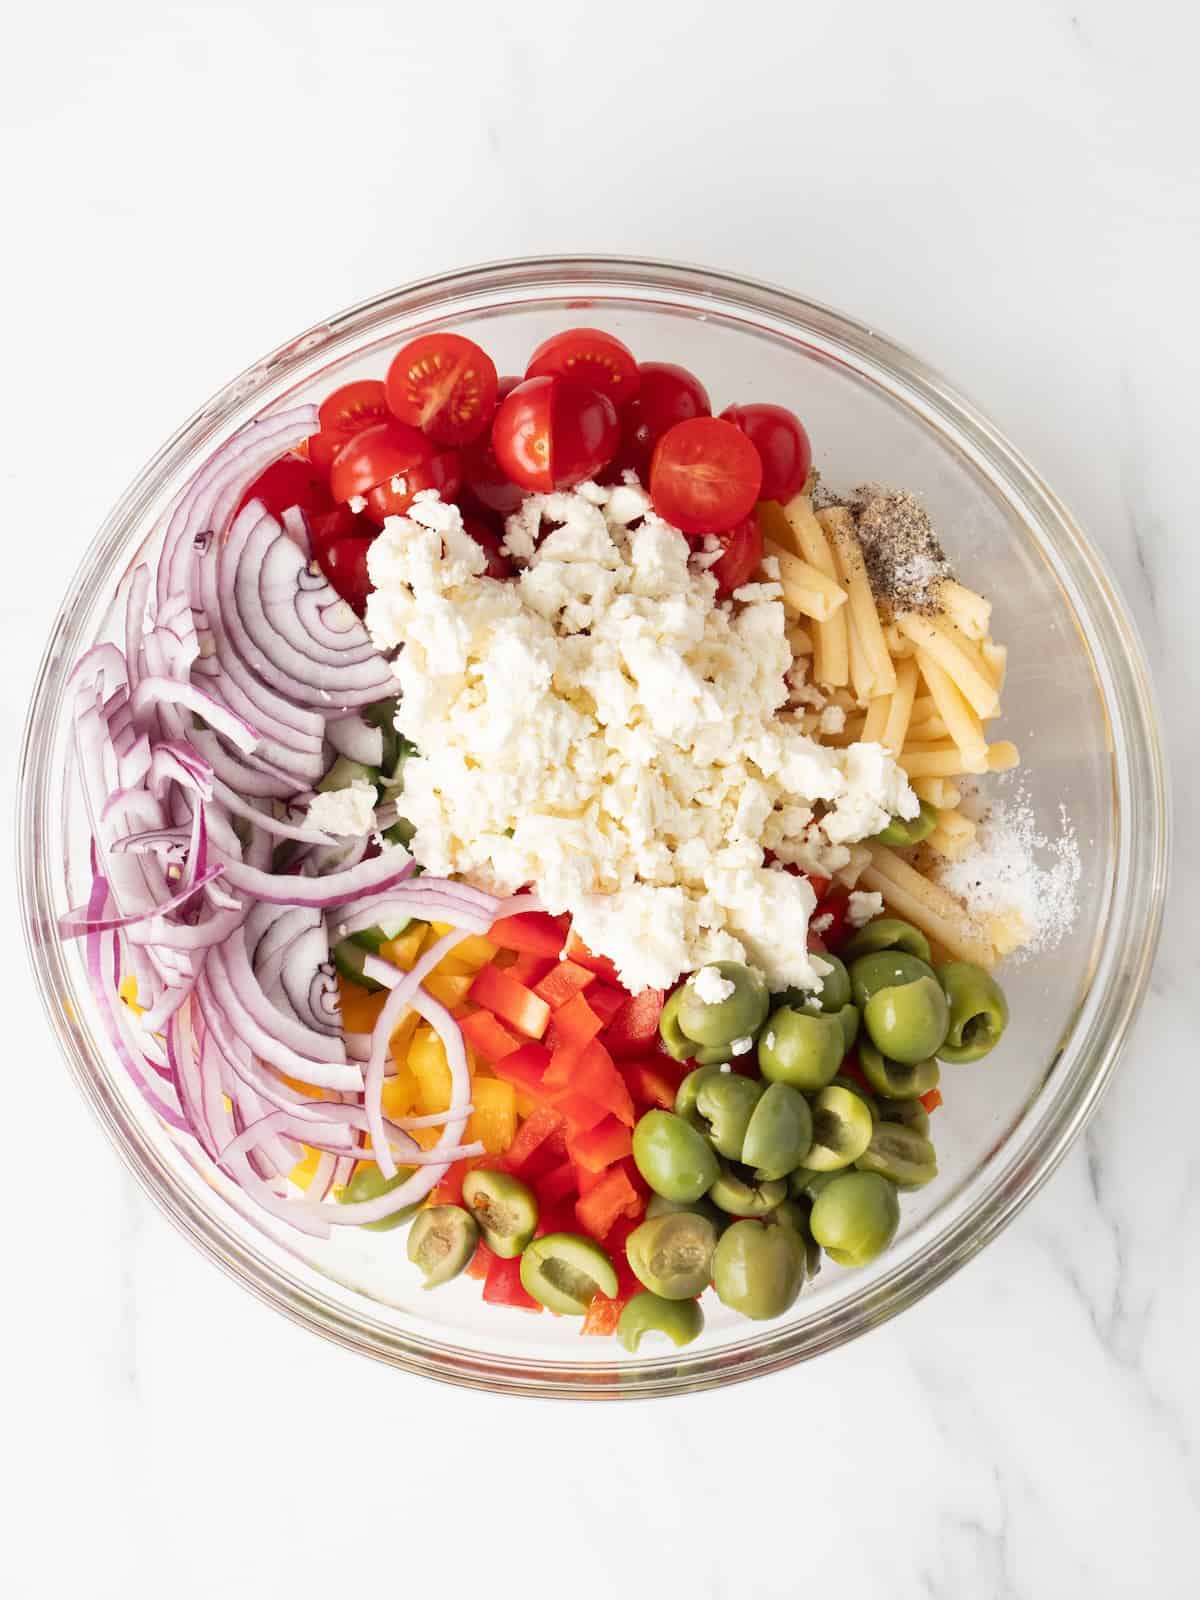 A large glass mixing bowl with all ingredients added to make greek pasta salad.